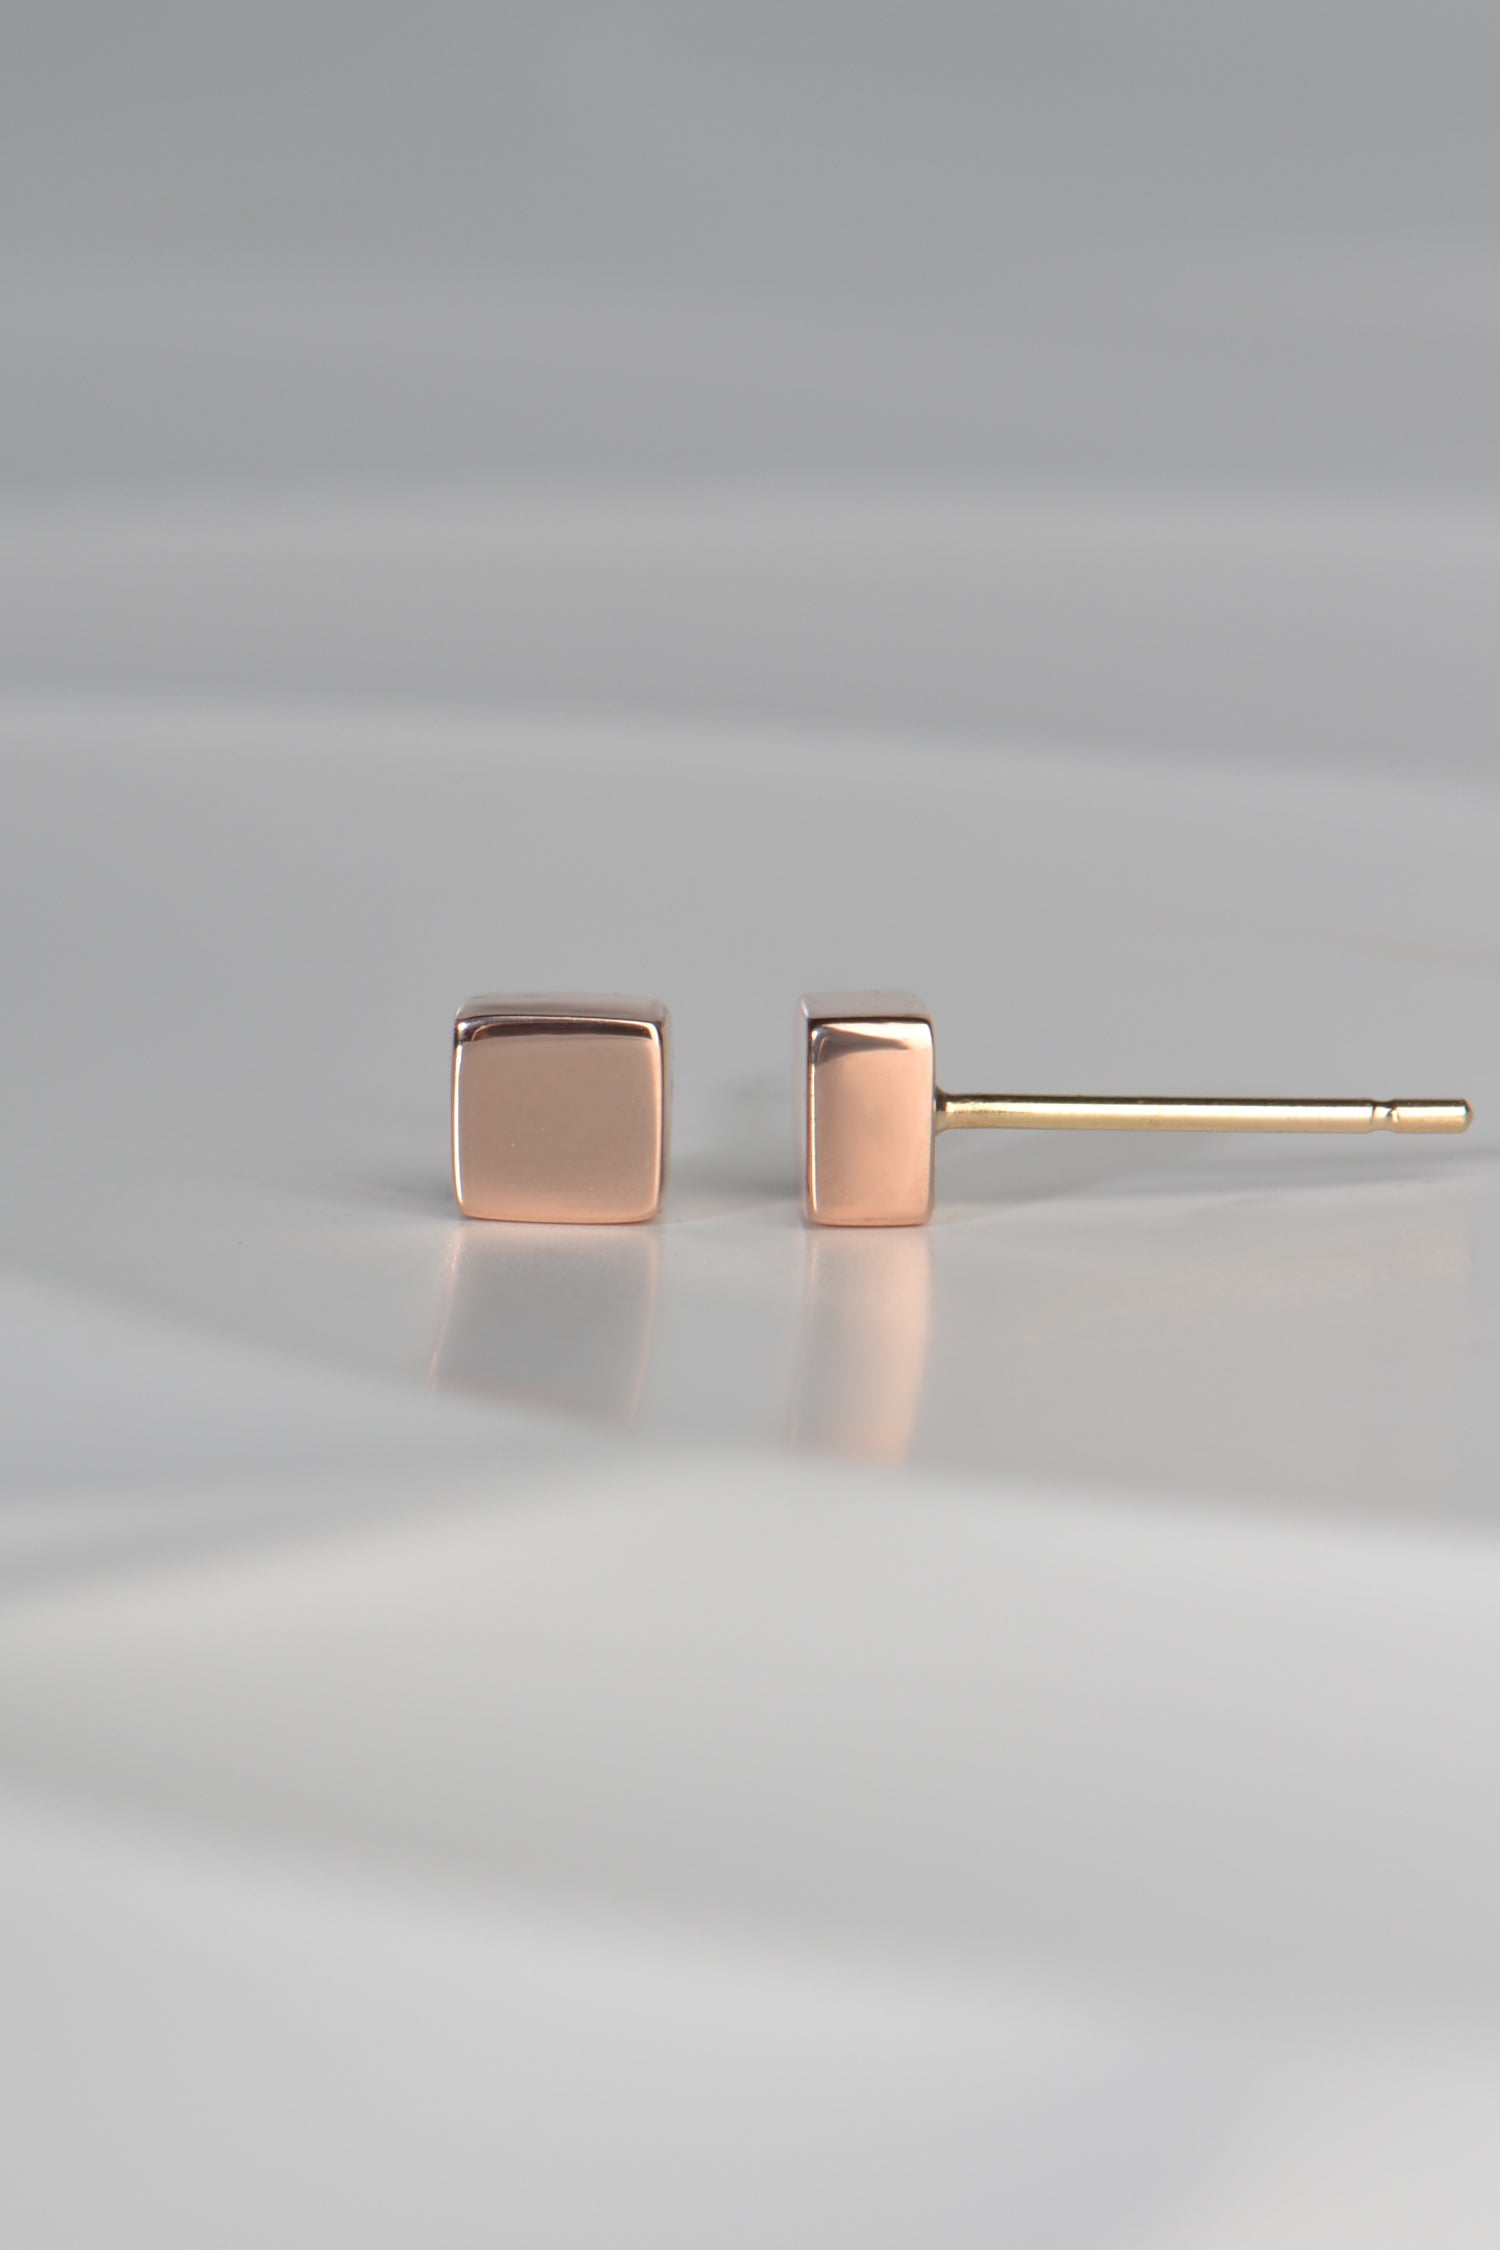 side view of rose gold 5mm square earrings showing that they are deep and substantial and look like minature blocks of stone.